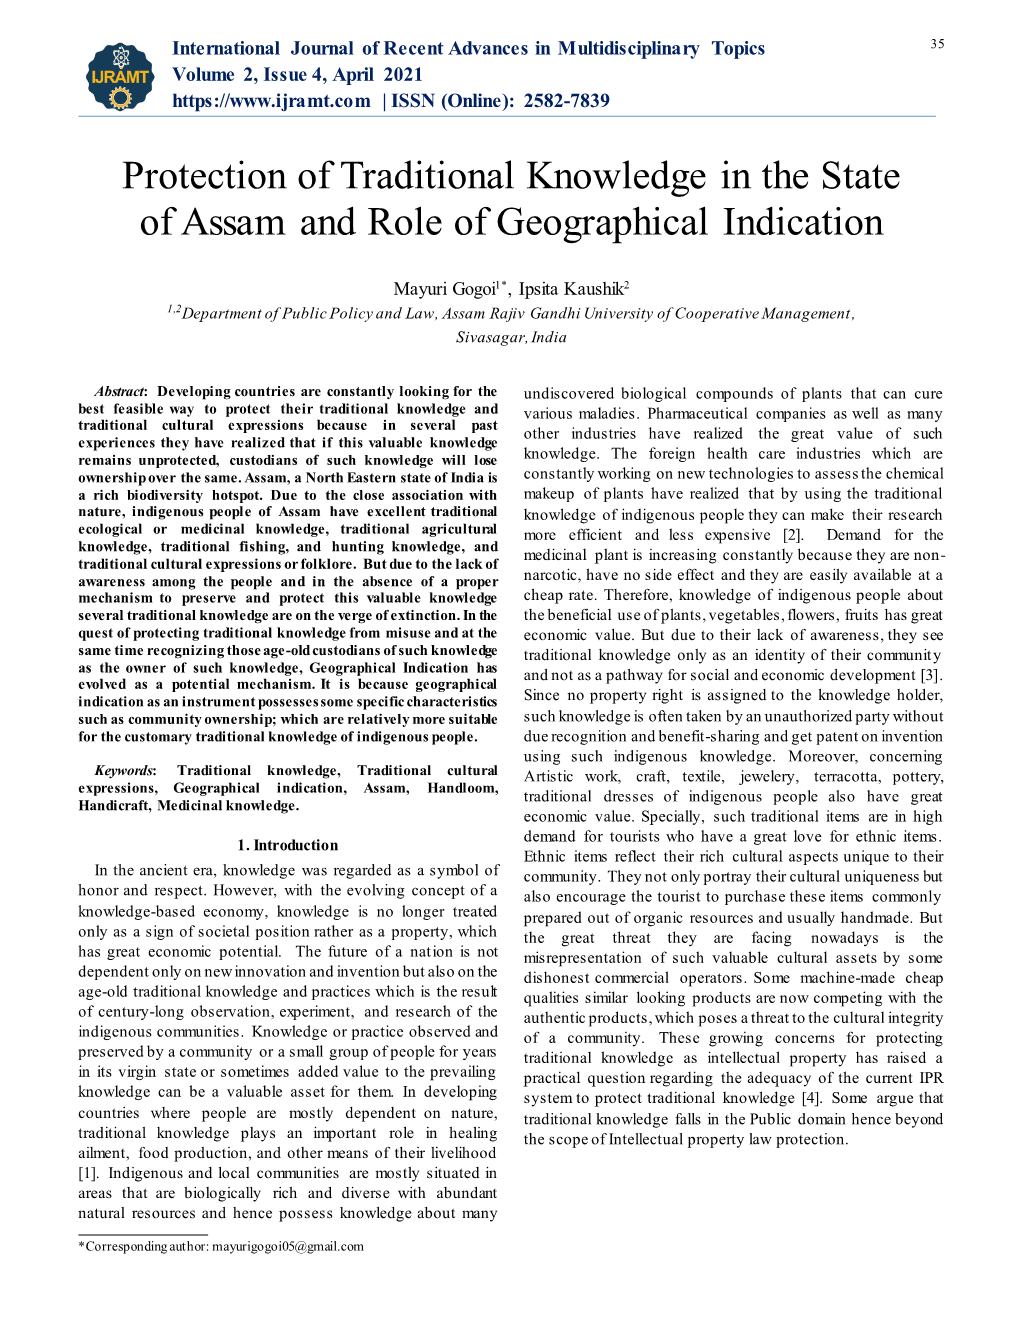 Protection of Traditional Knowledge in the State of Assam and Role of Geographical Indication